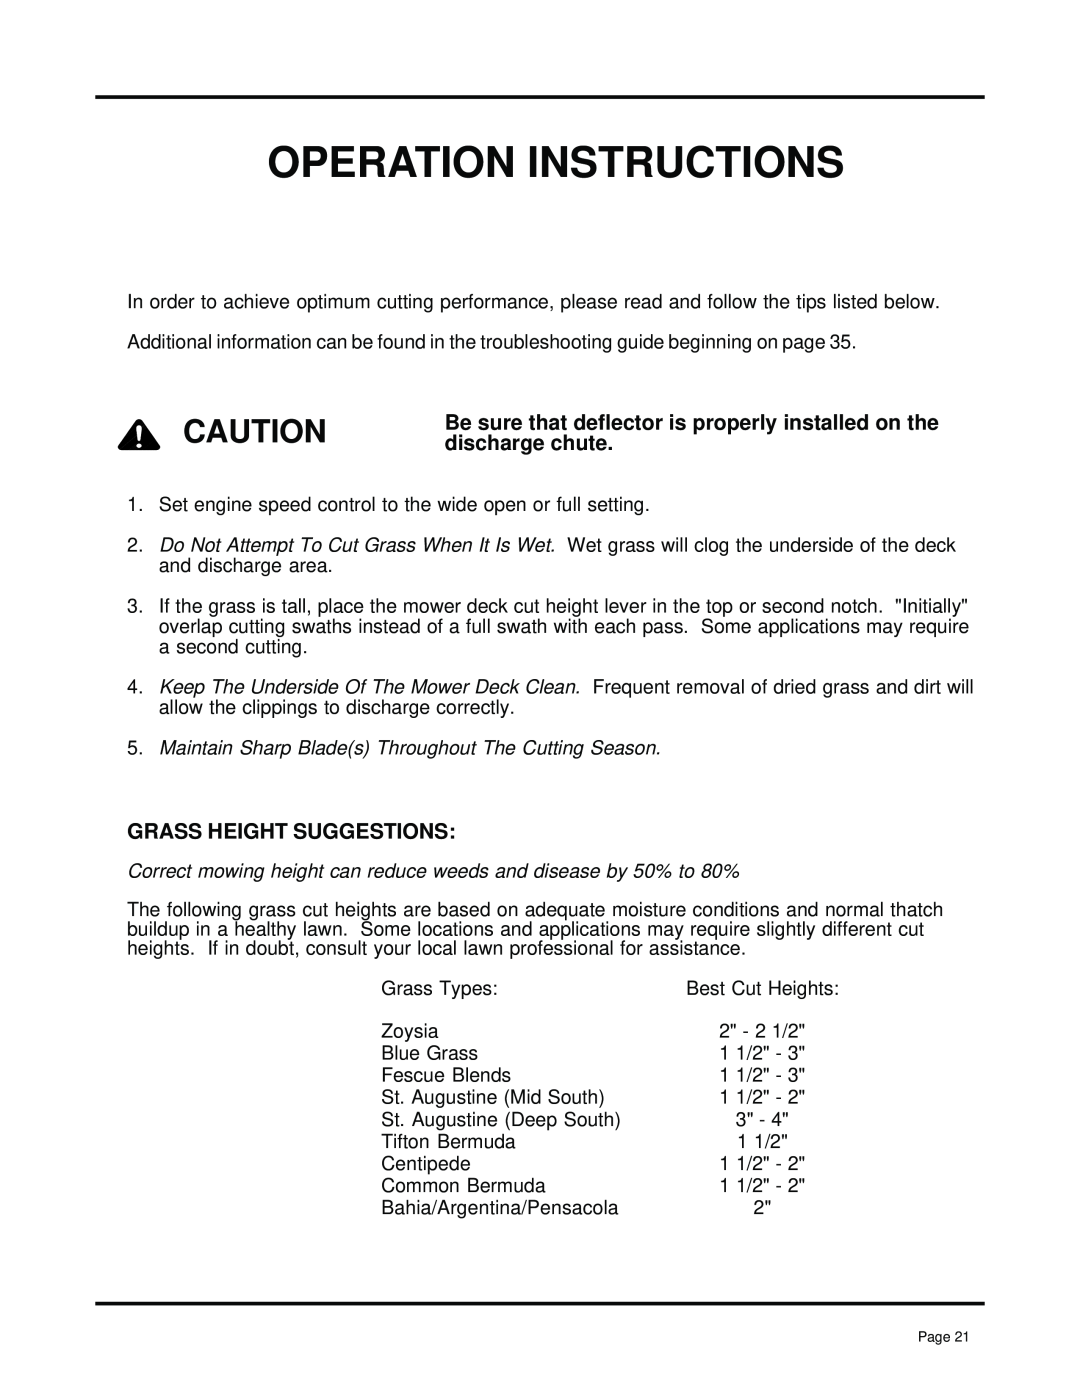 Dixon 13091-0500, ZTR 7025 Operation Instructions, Be sure that deflector is properly installed on the discharge chute 